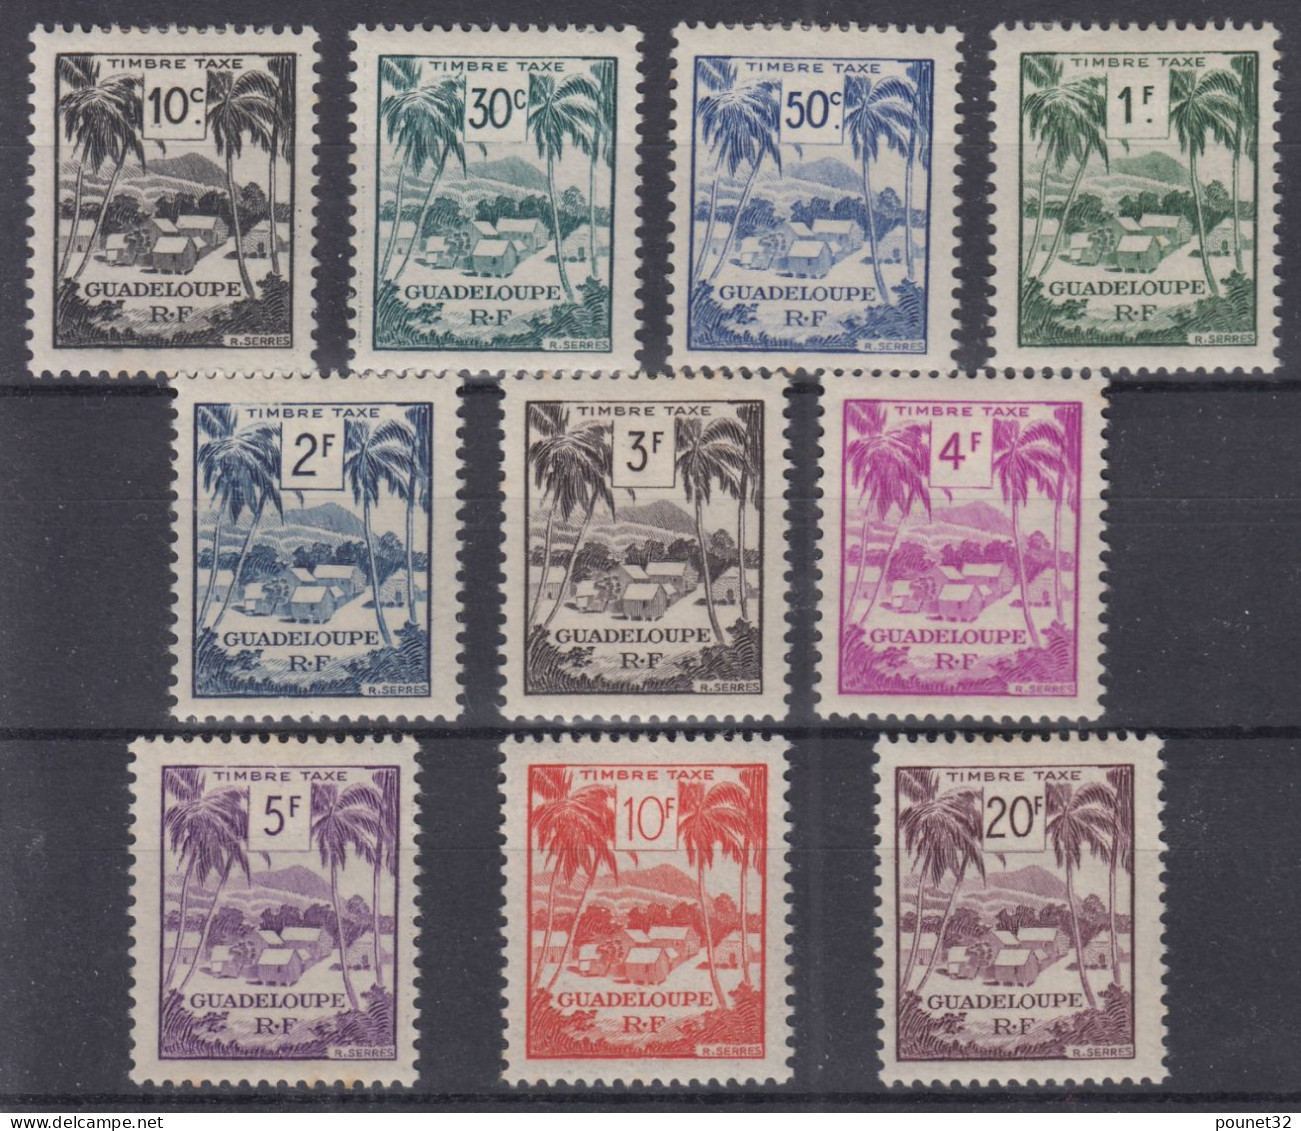 GUADELOUPE 1947 SERIE TAXE N° 41/50 NEUFS * GOMME AVEC CHARNIERE - Postage Due